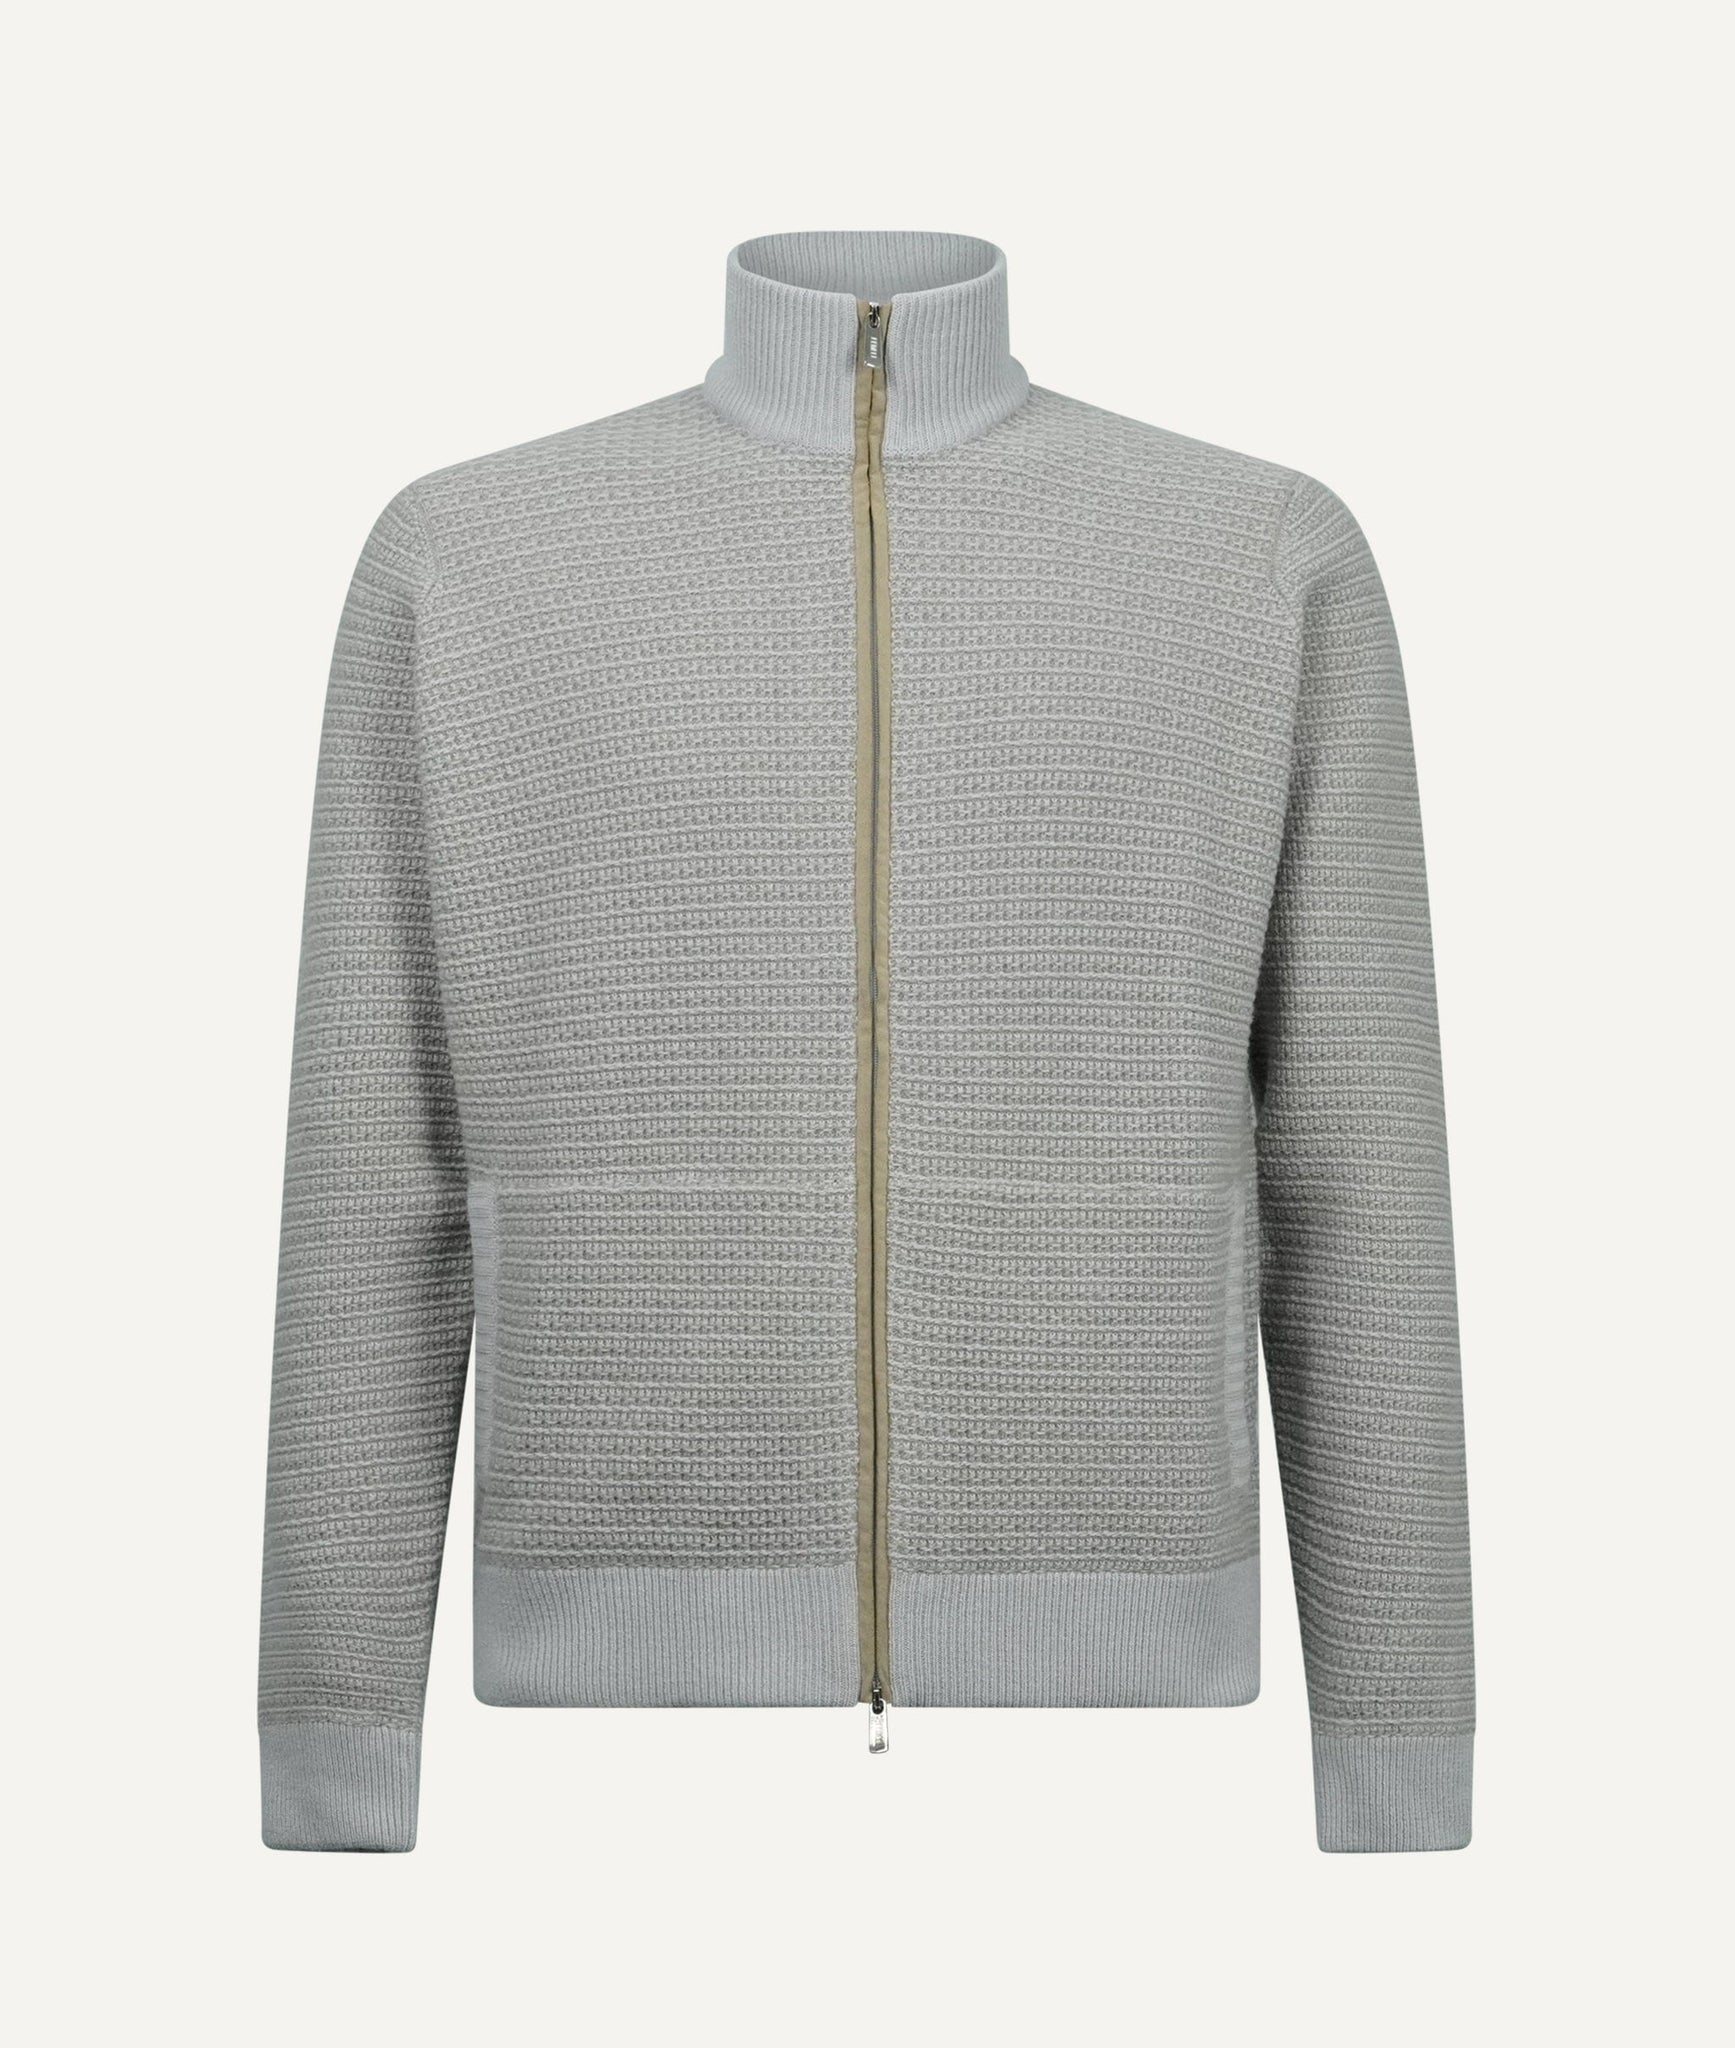 Fedeli - Zip-Up Sweater in Wool & Cashmere